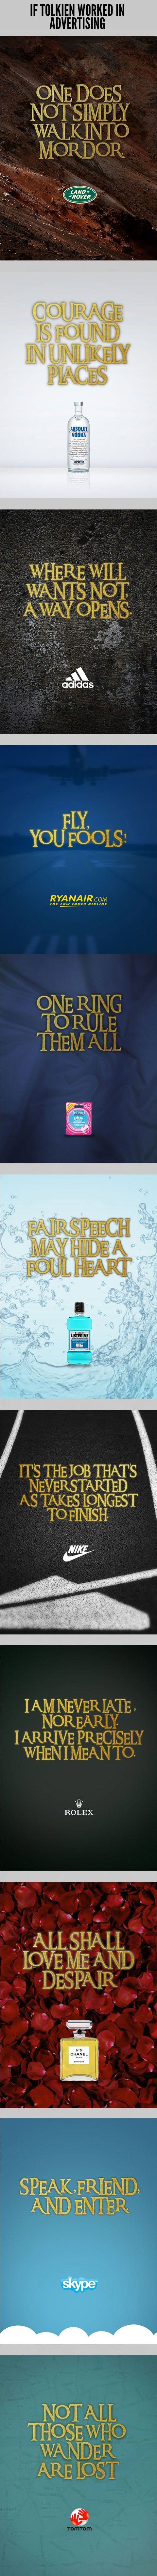 If Tolkien worked in advertising.